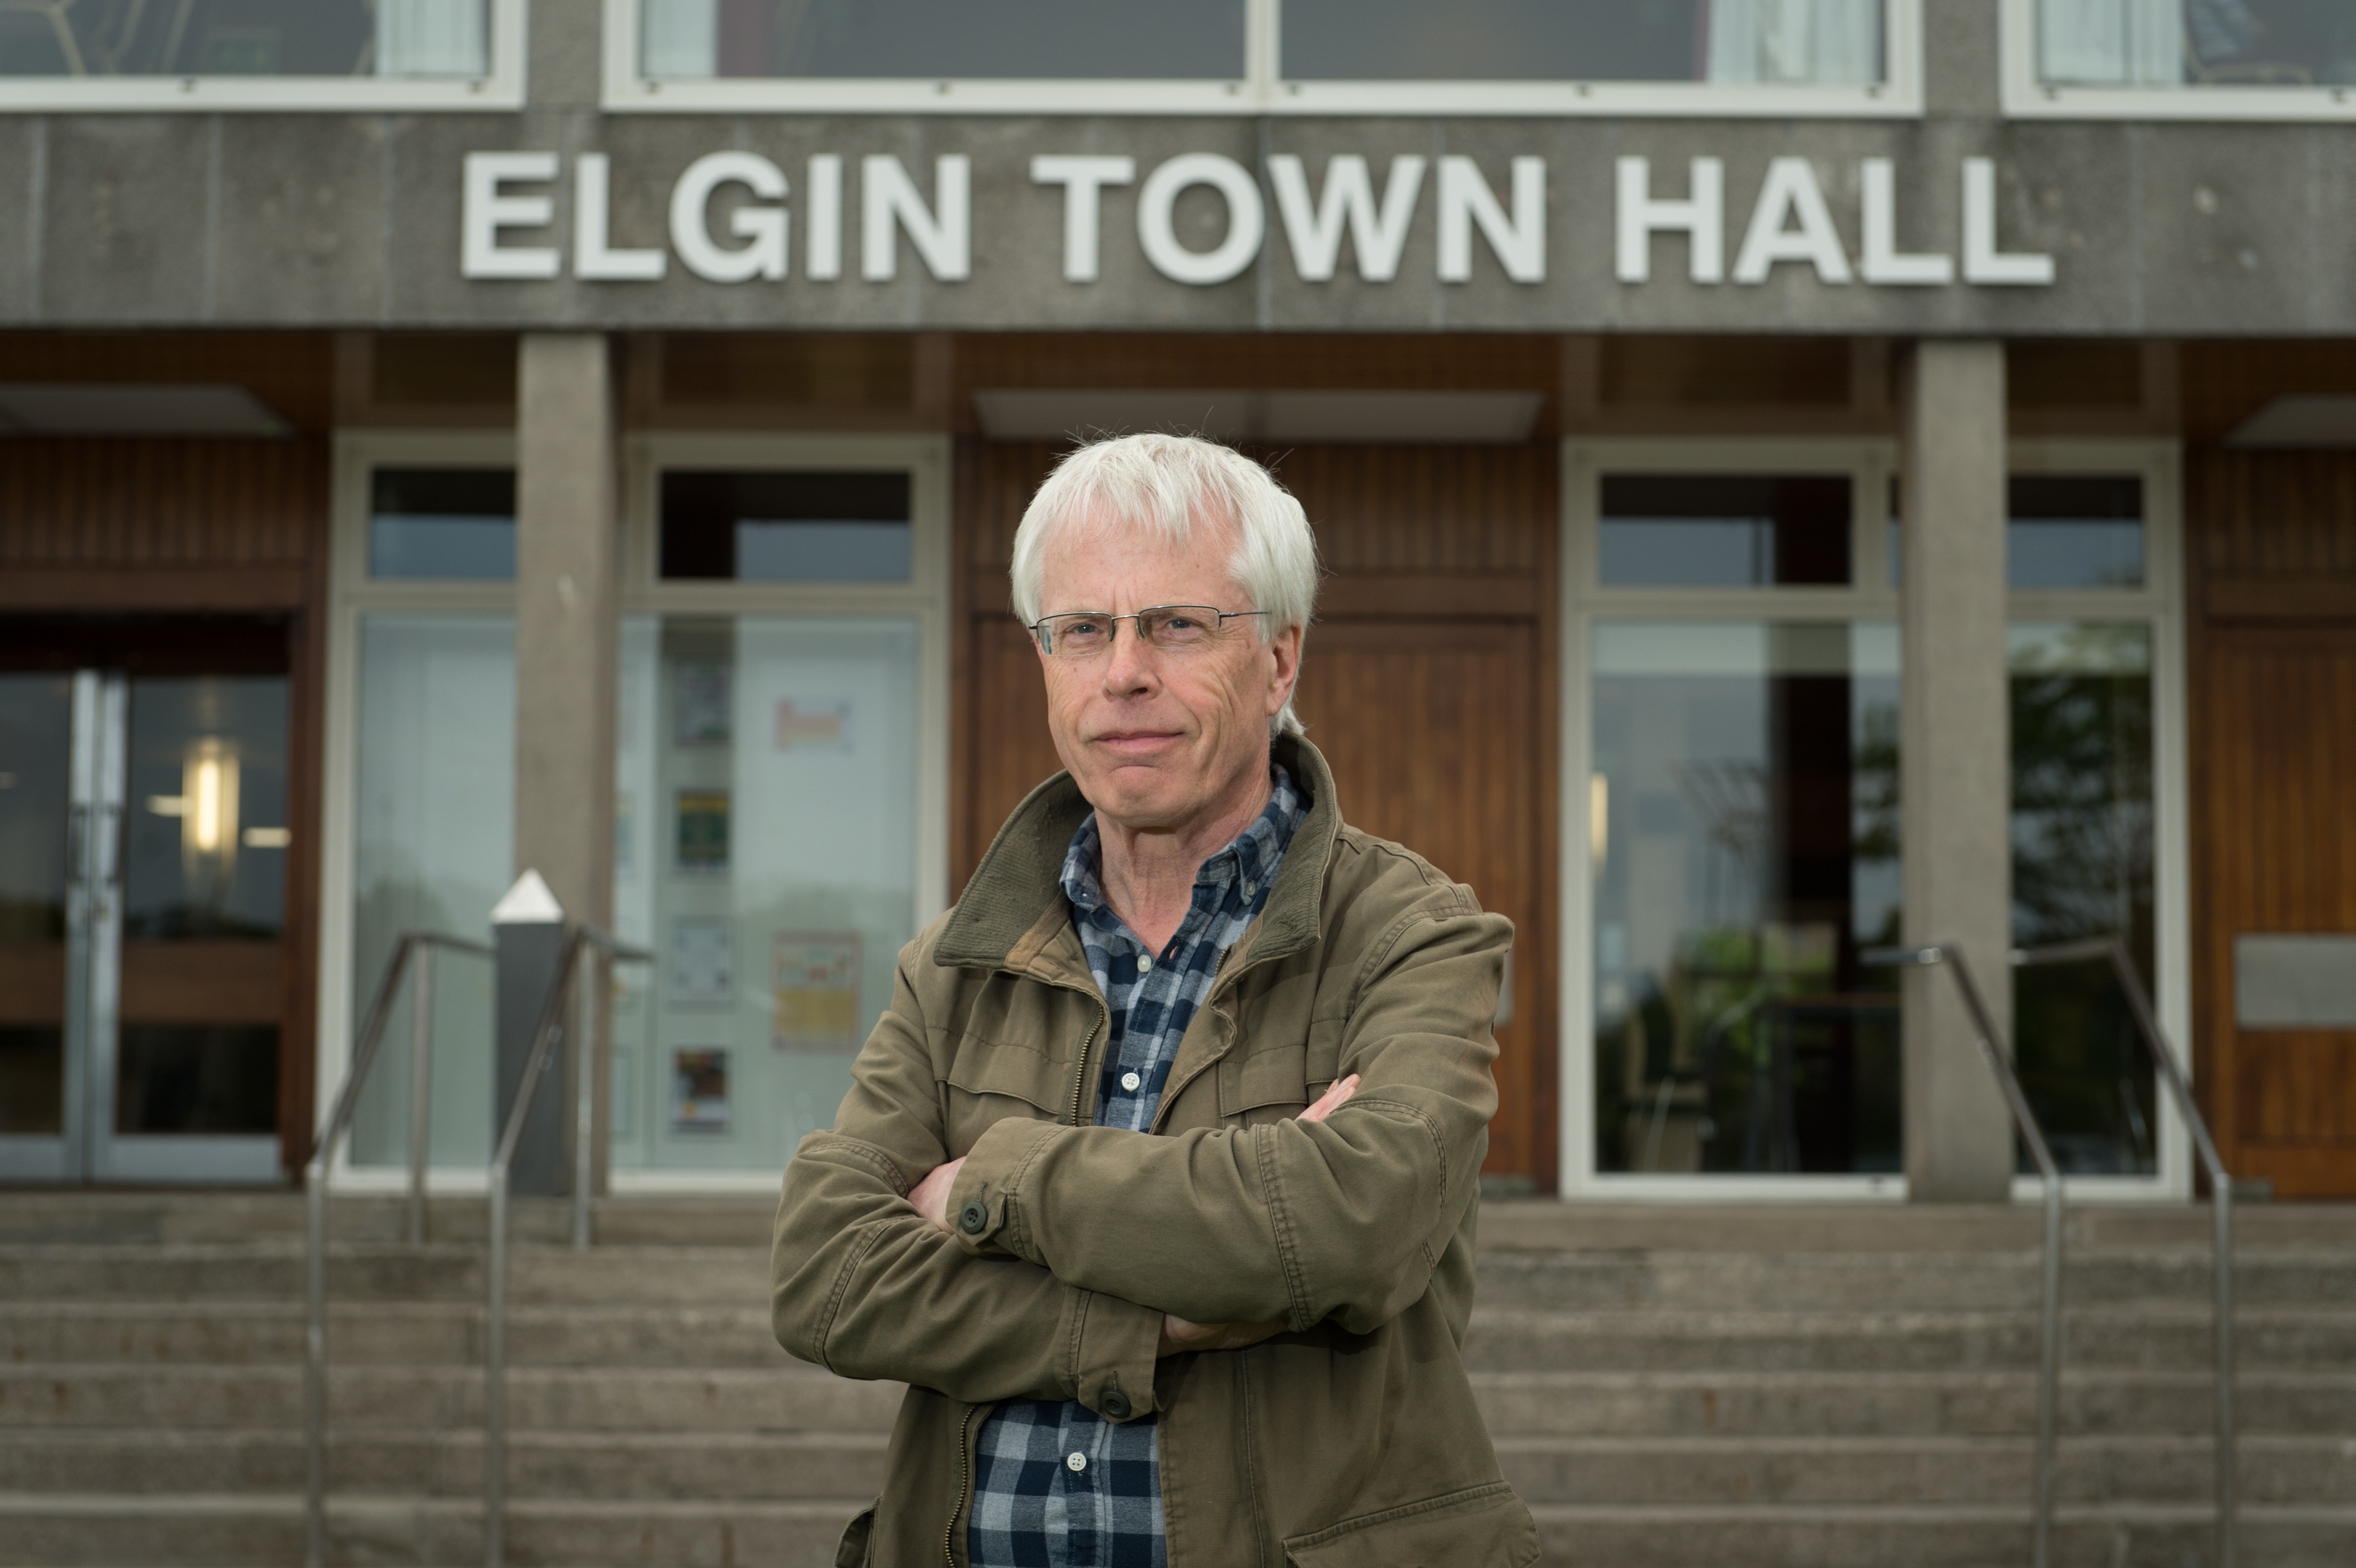 Elgin Town Hall for the Community chairman Mike Devenney is optimistic about the venue's future.